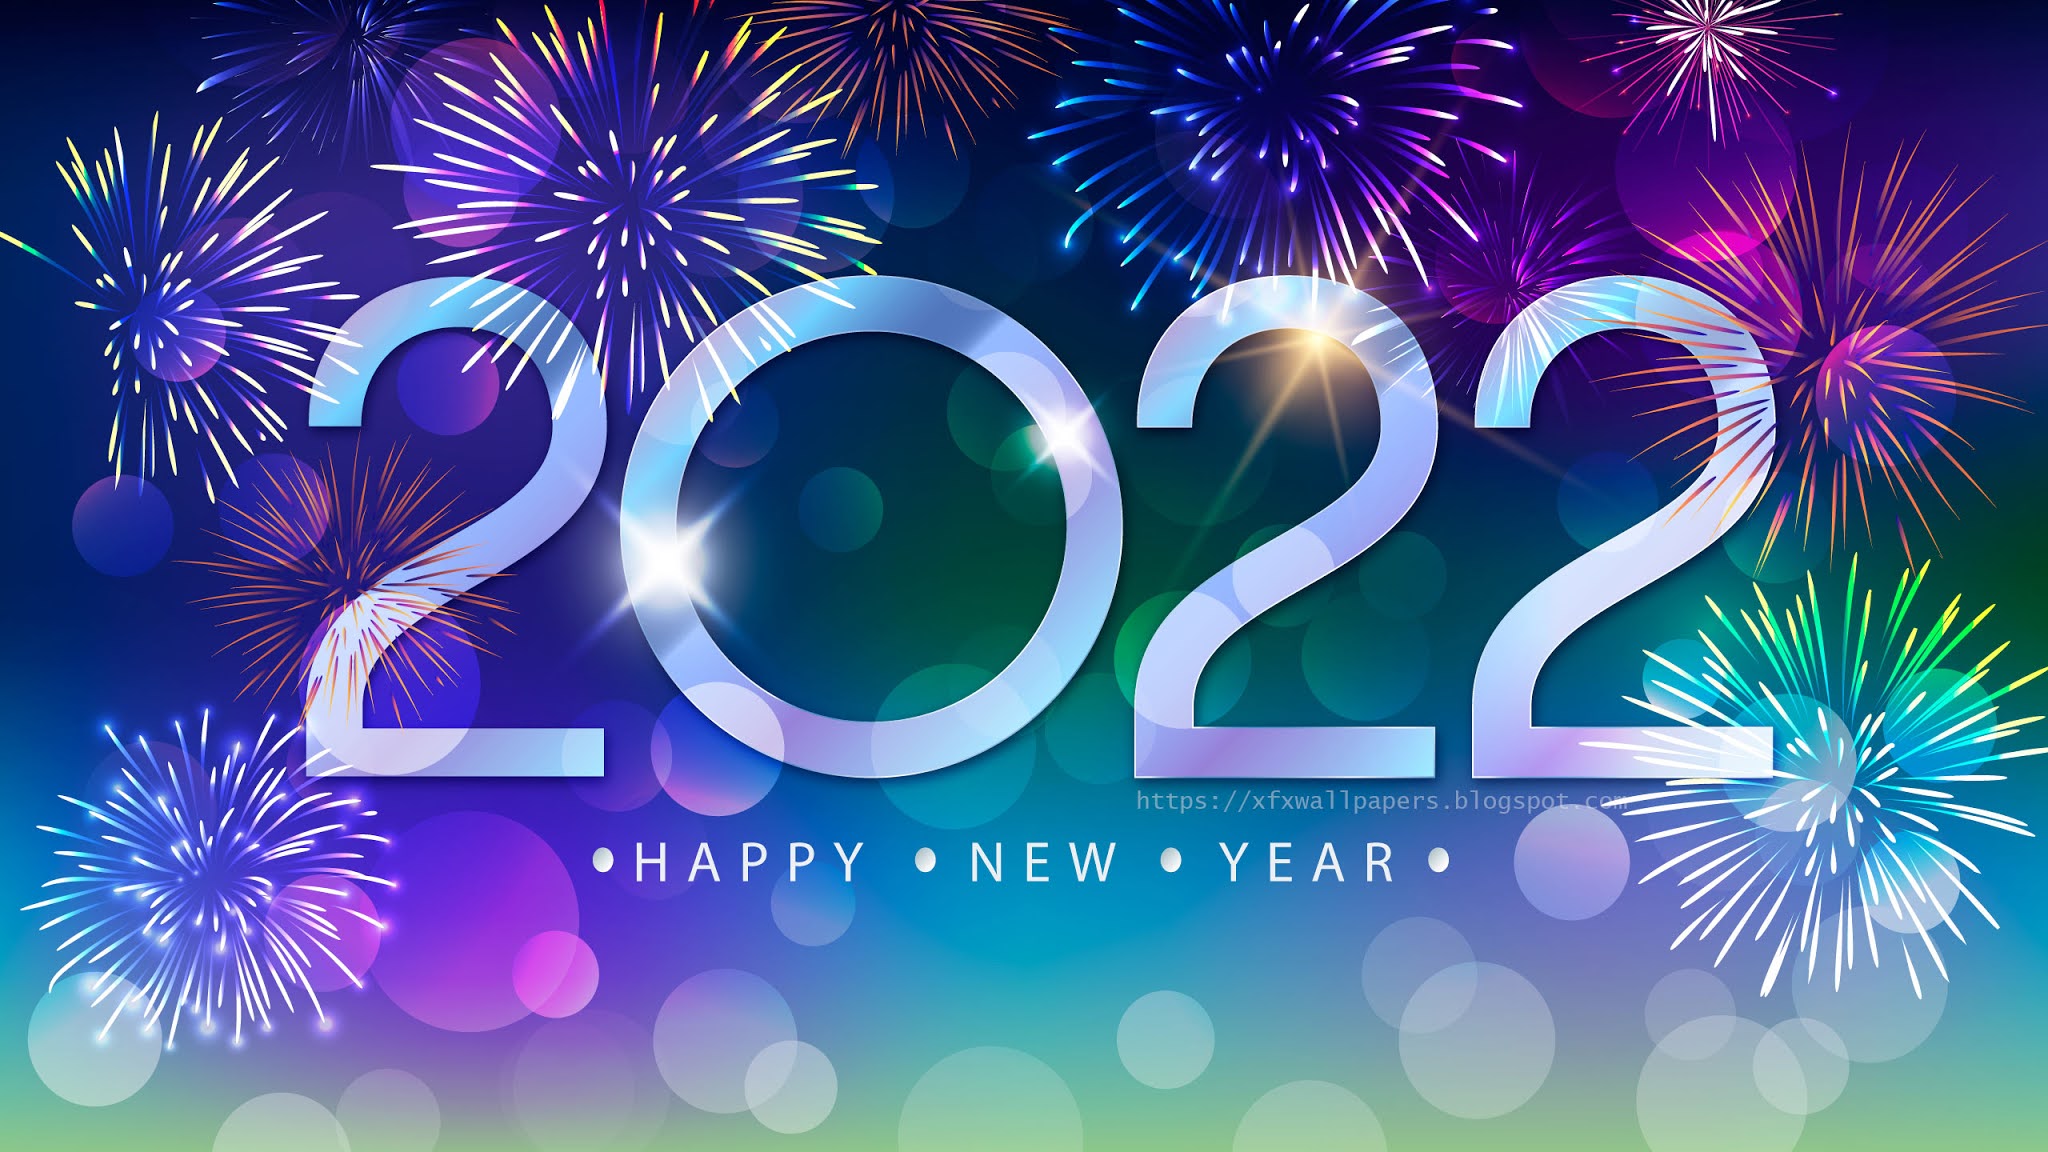 Happy New Year 2022 Full HD Wallpapers